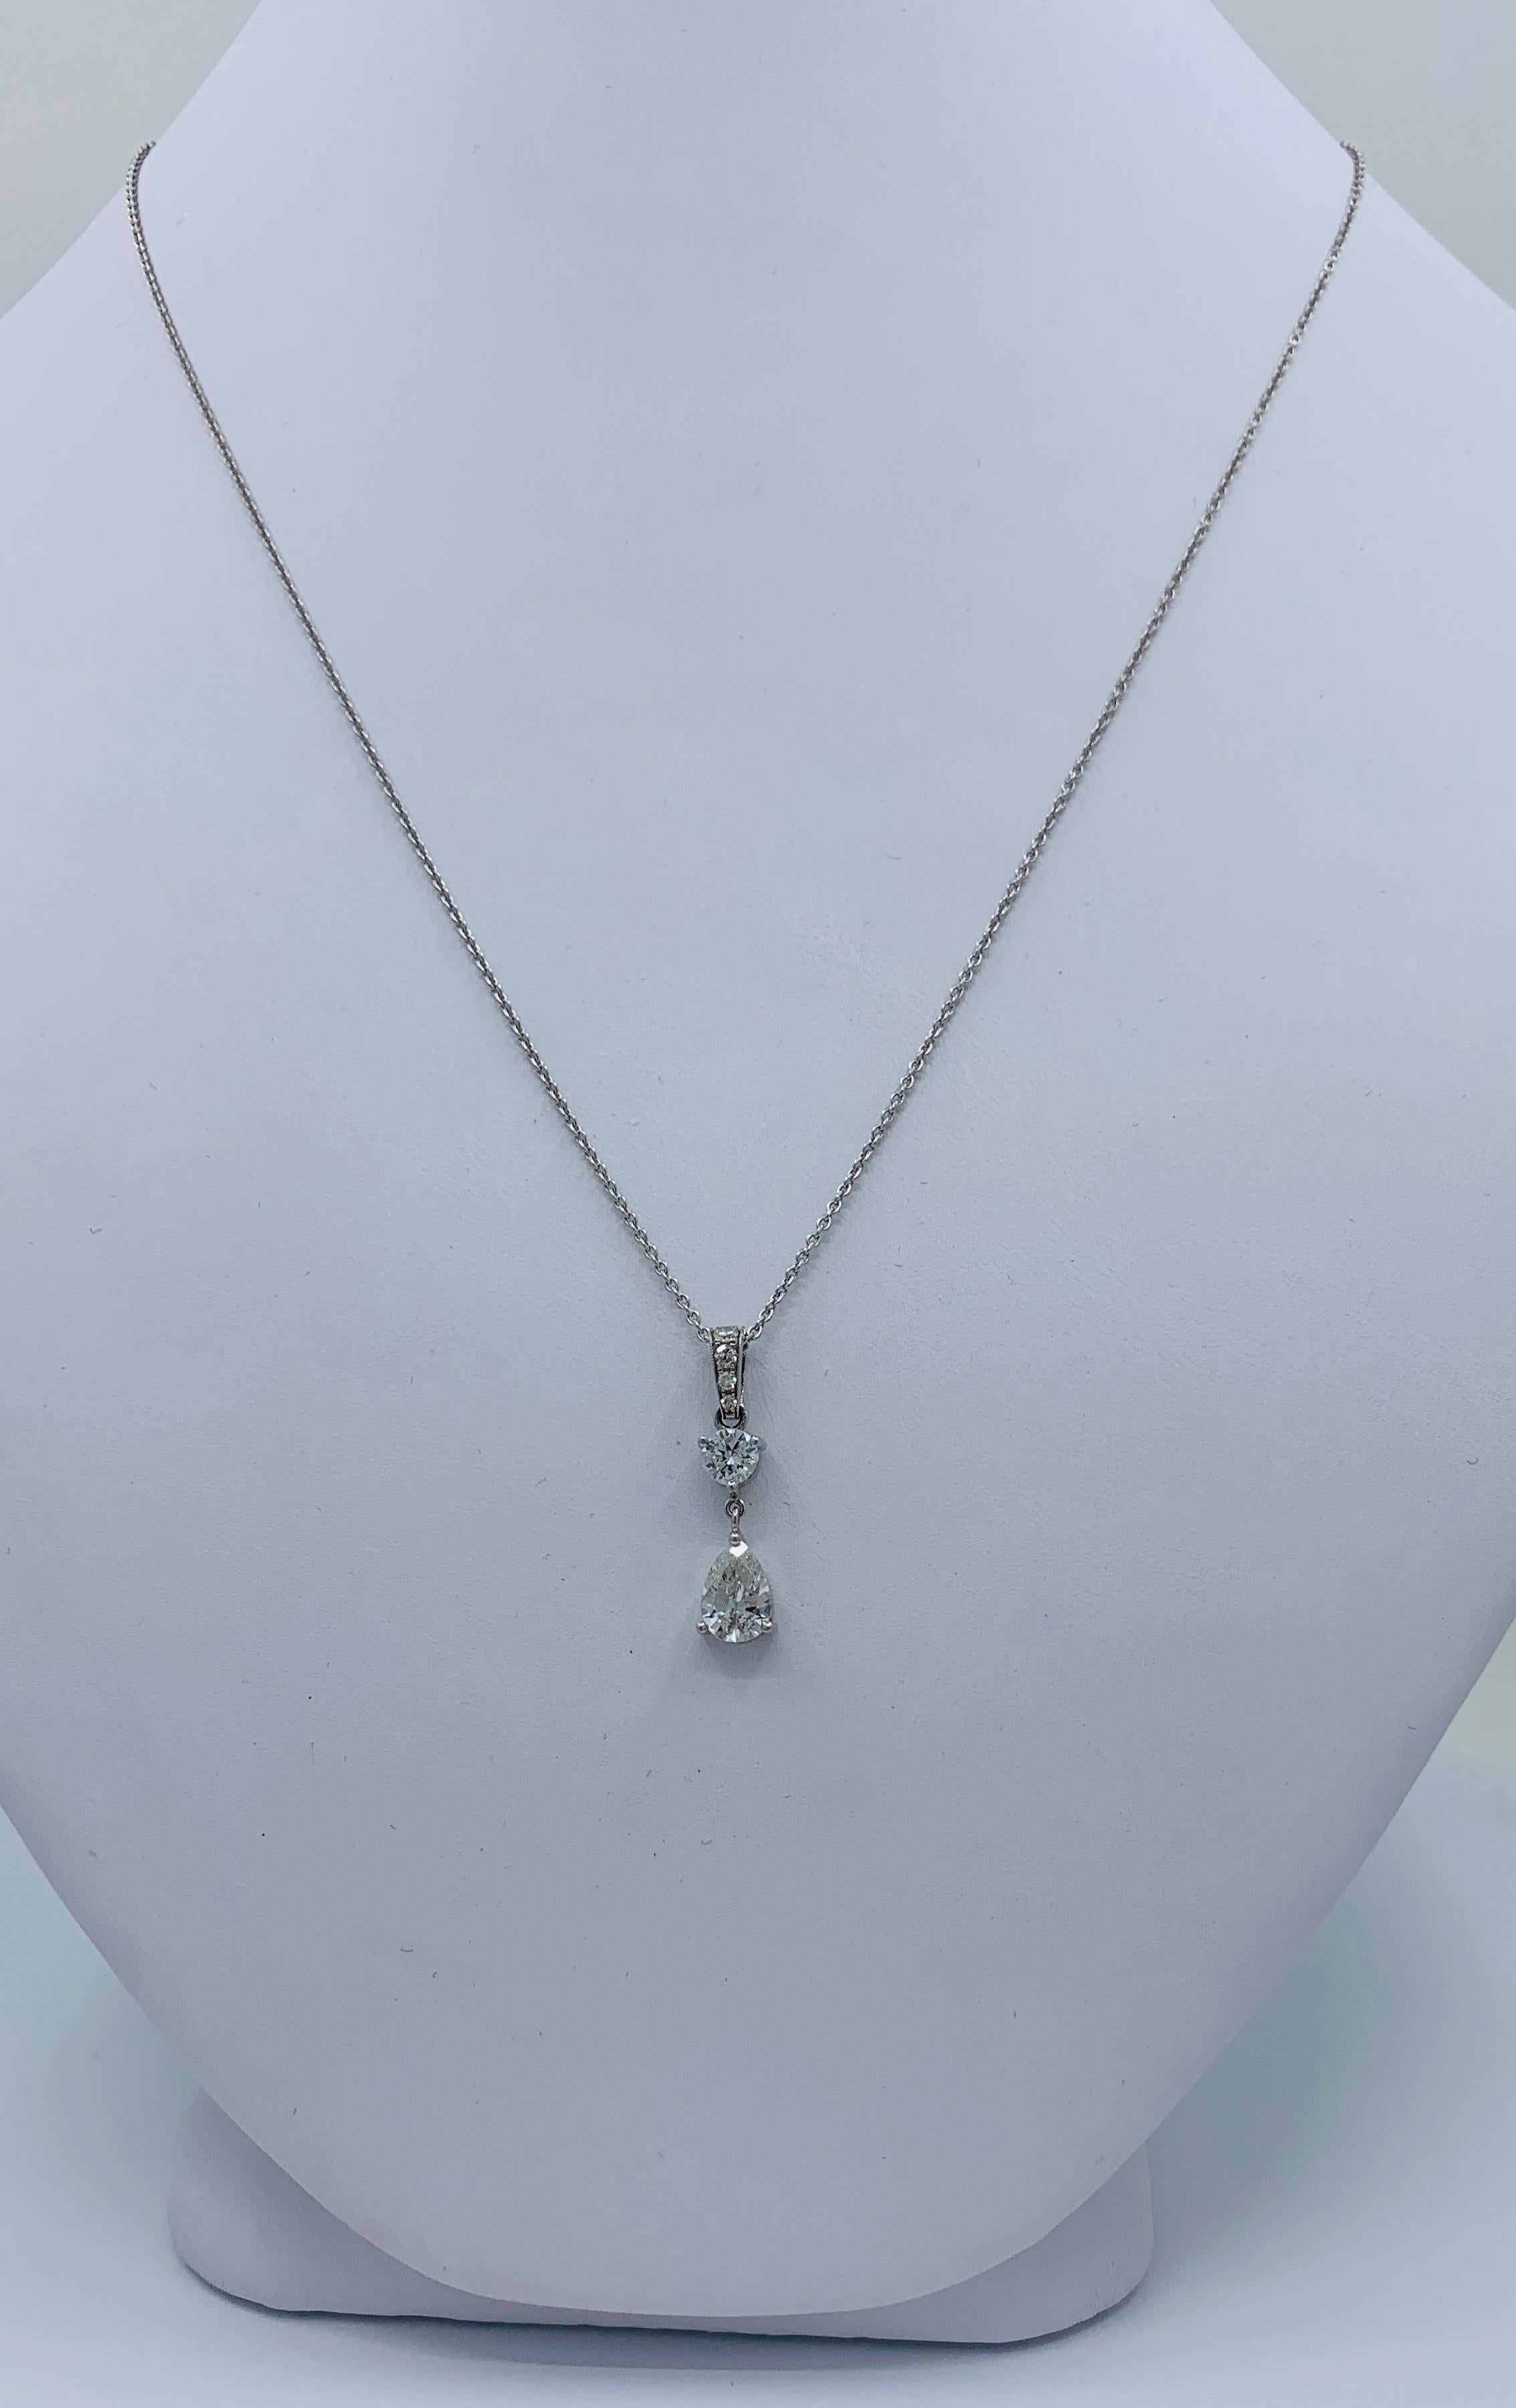 1 Carat Diamonds White Gold Pendant Necklace Pear Cut with Round Diamond Accents 1